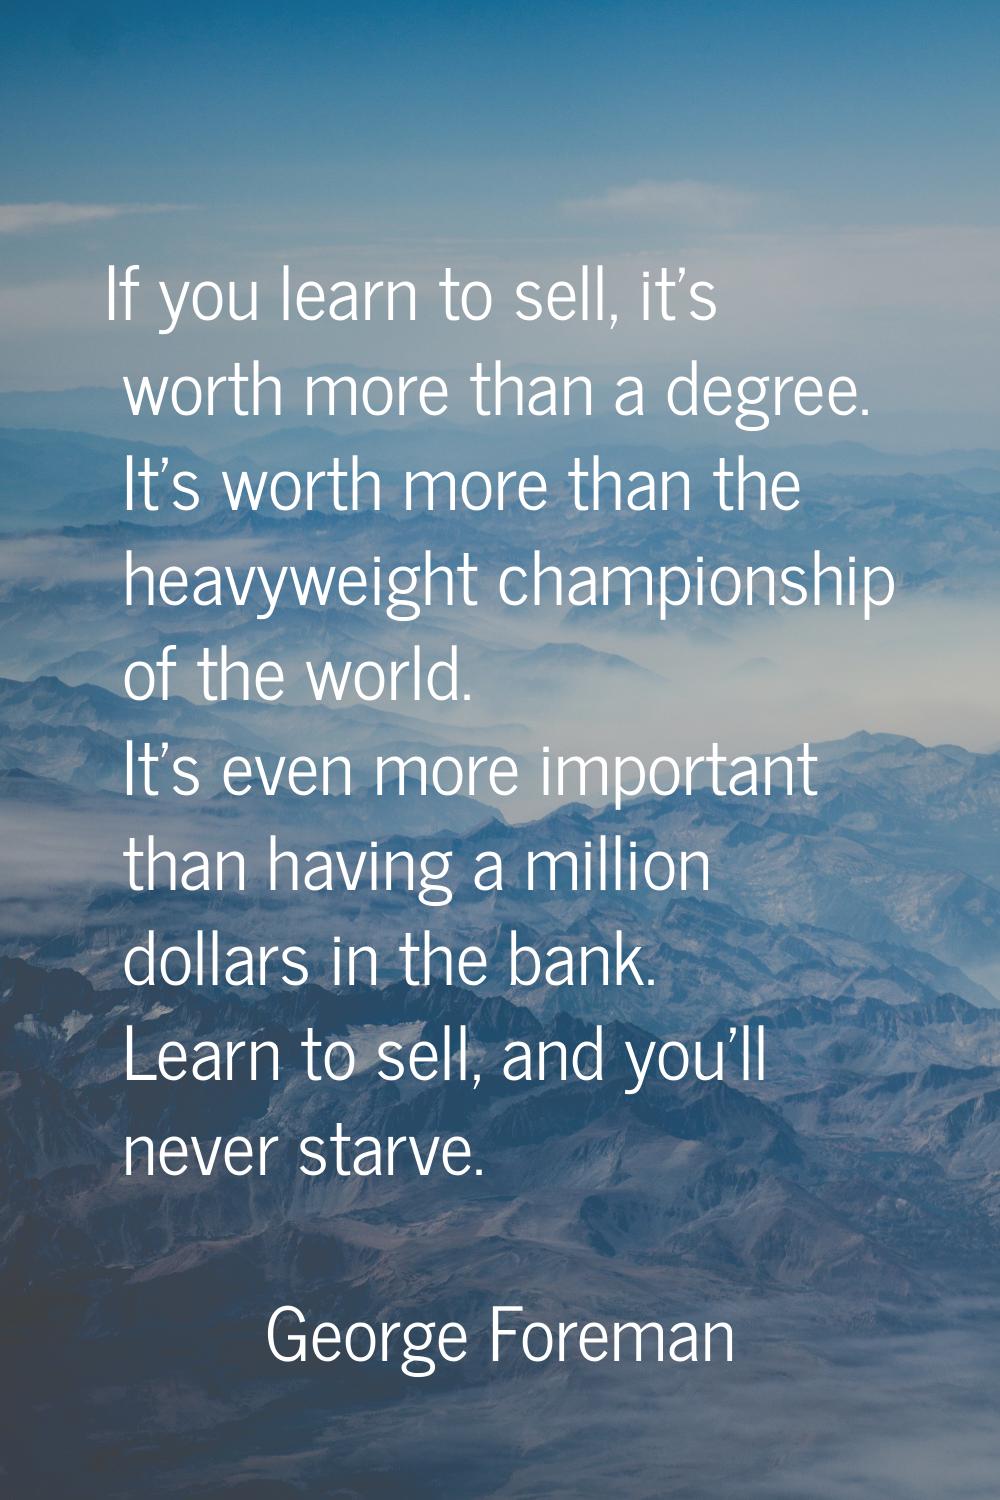 If you learn to sell, it's worth more than a degree. It's worth more than the heavyweight champions